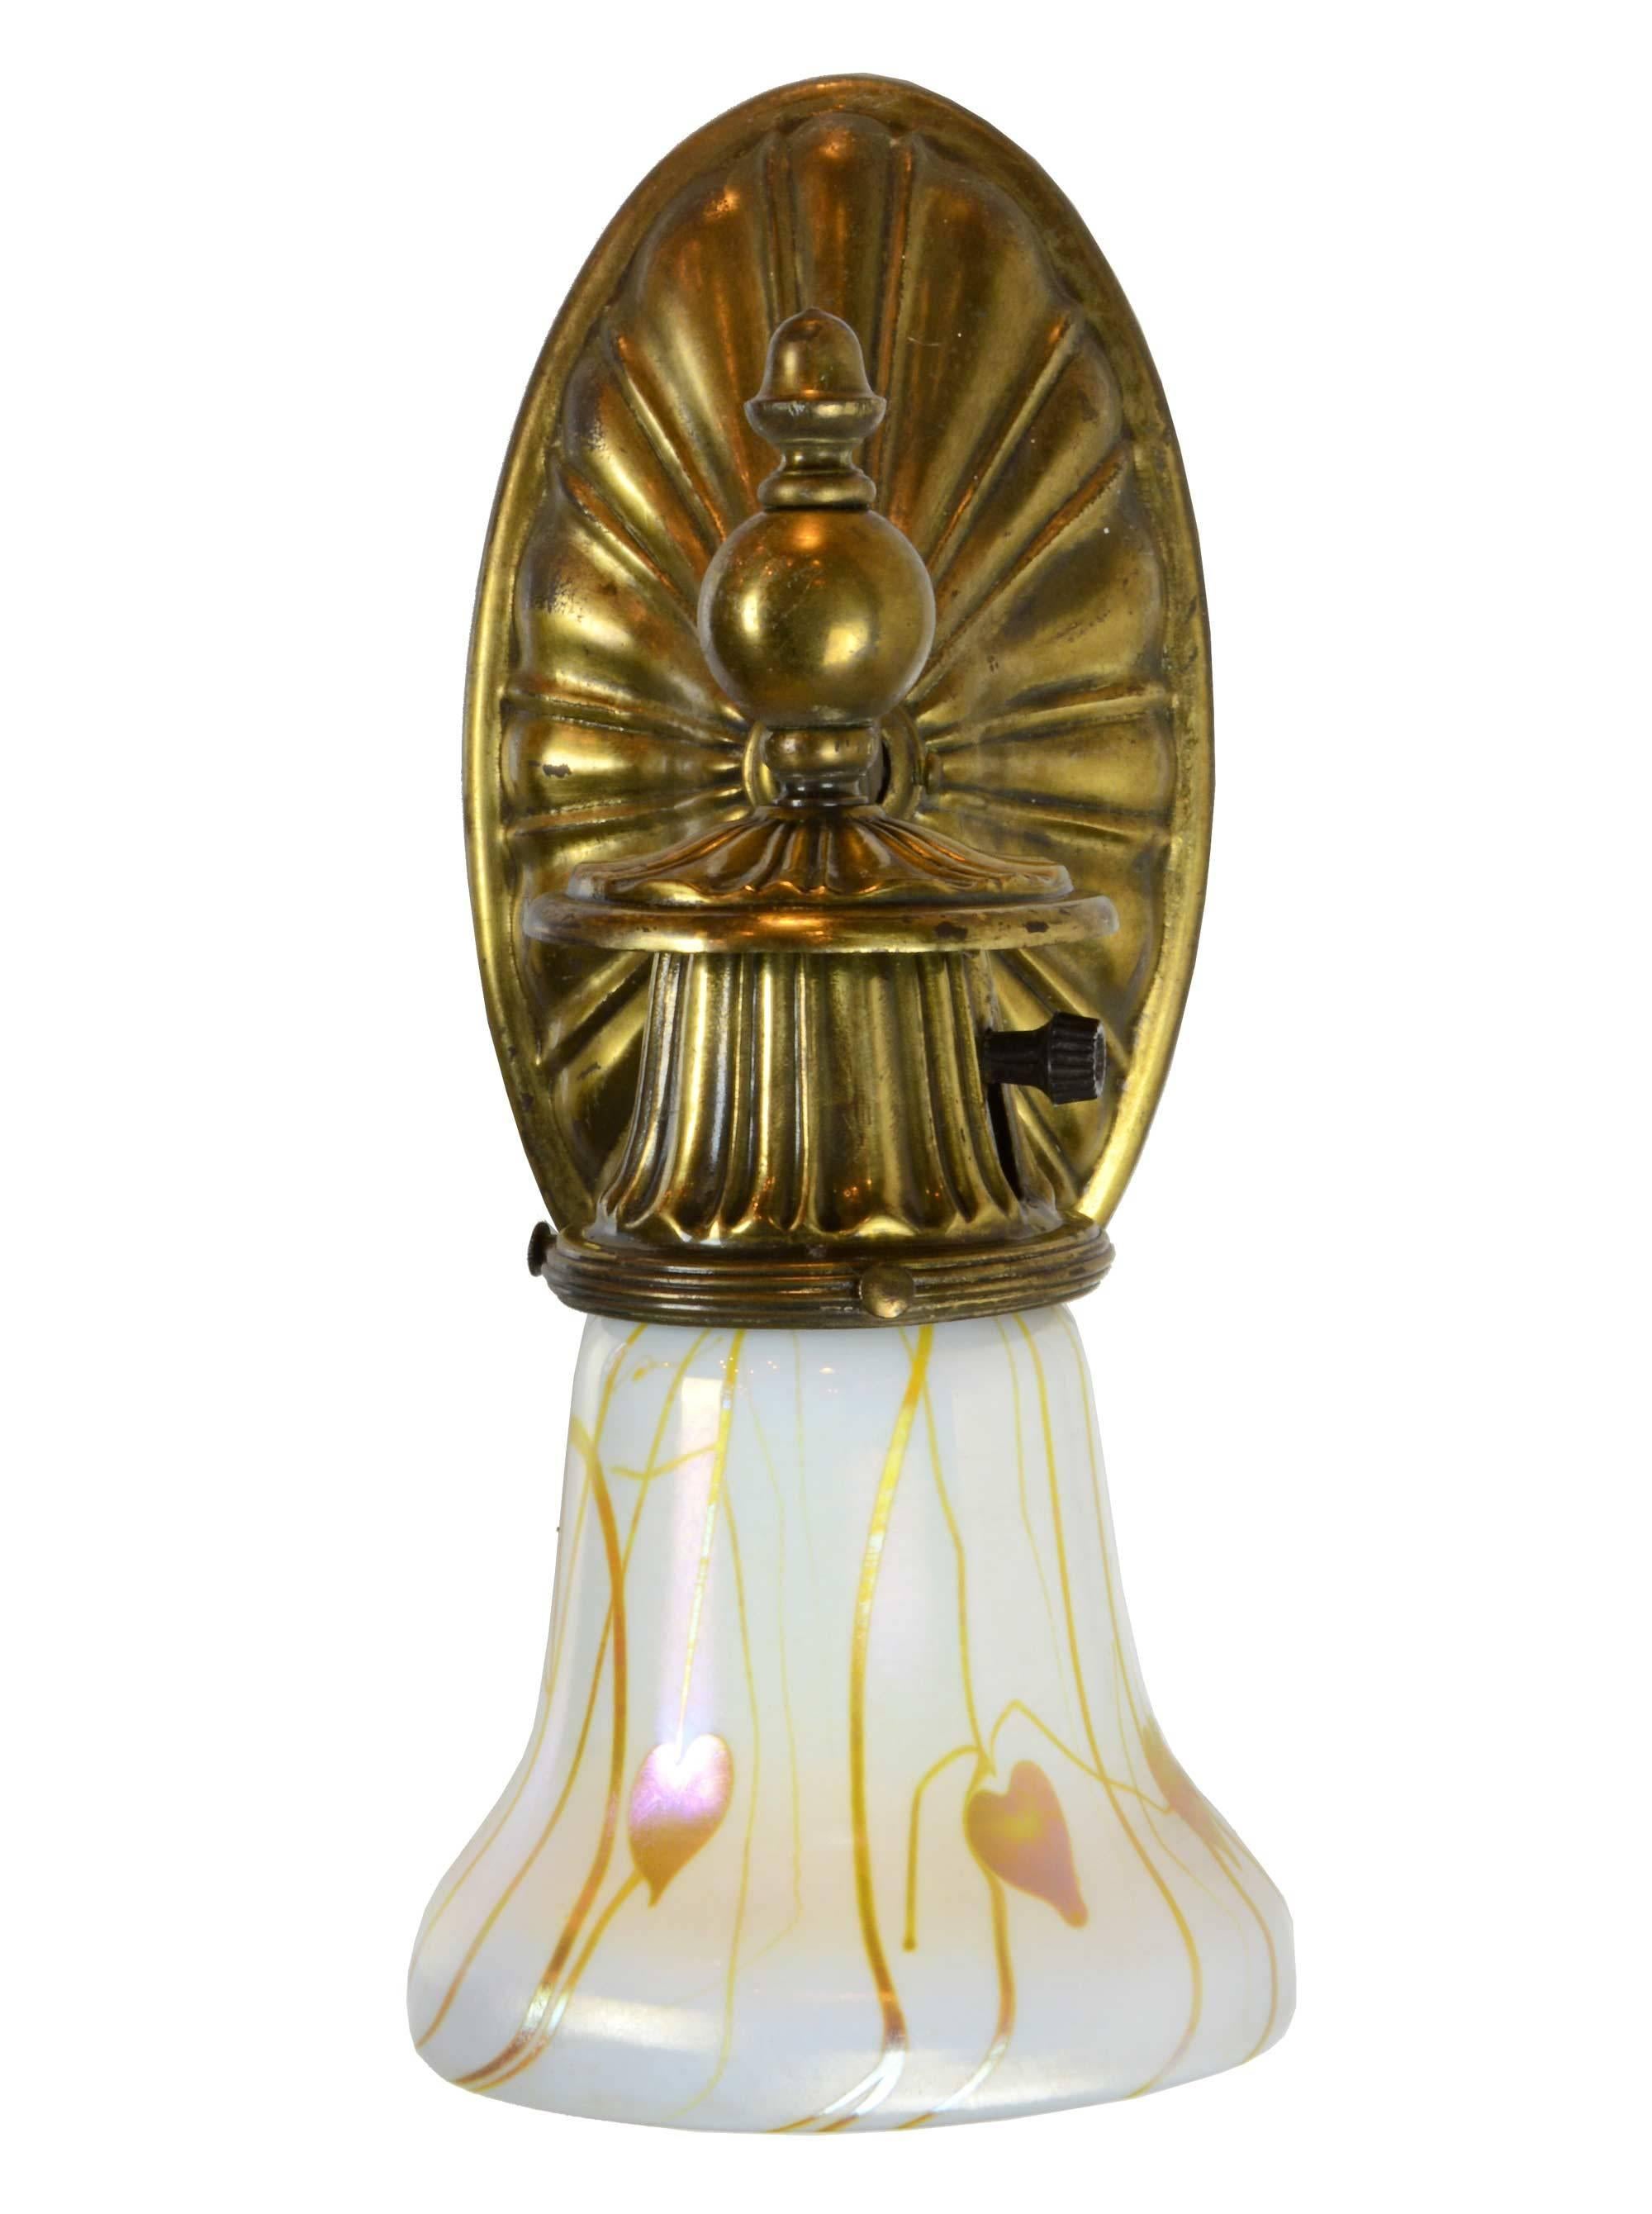 American Brass Sheffield Sconce with Shade, circa 1915